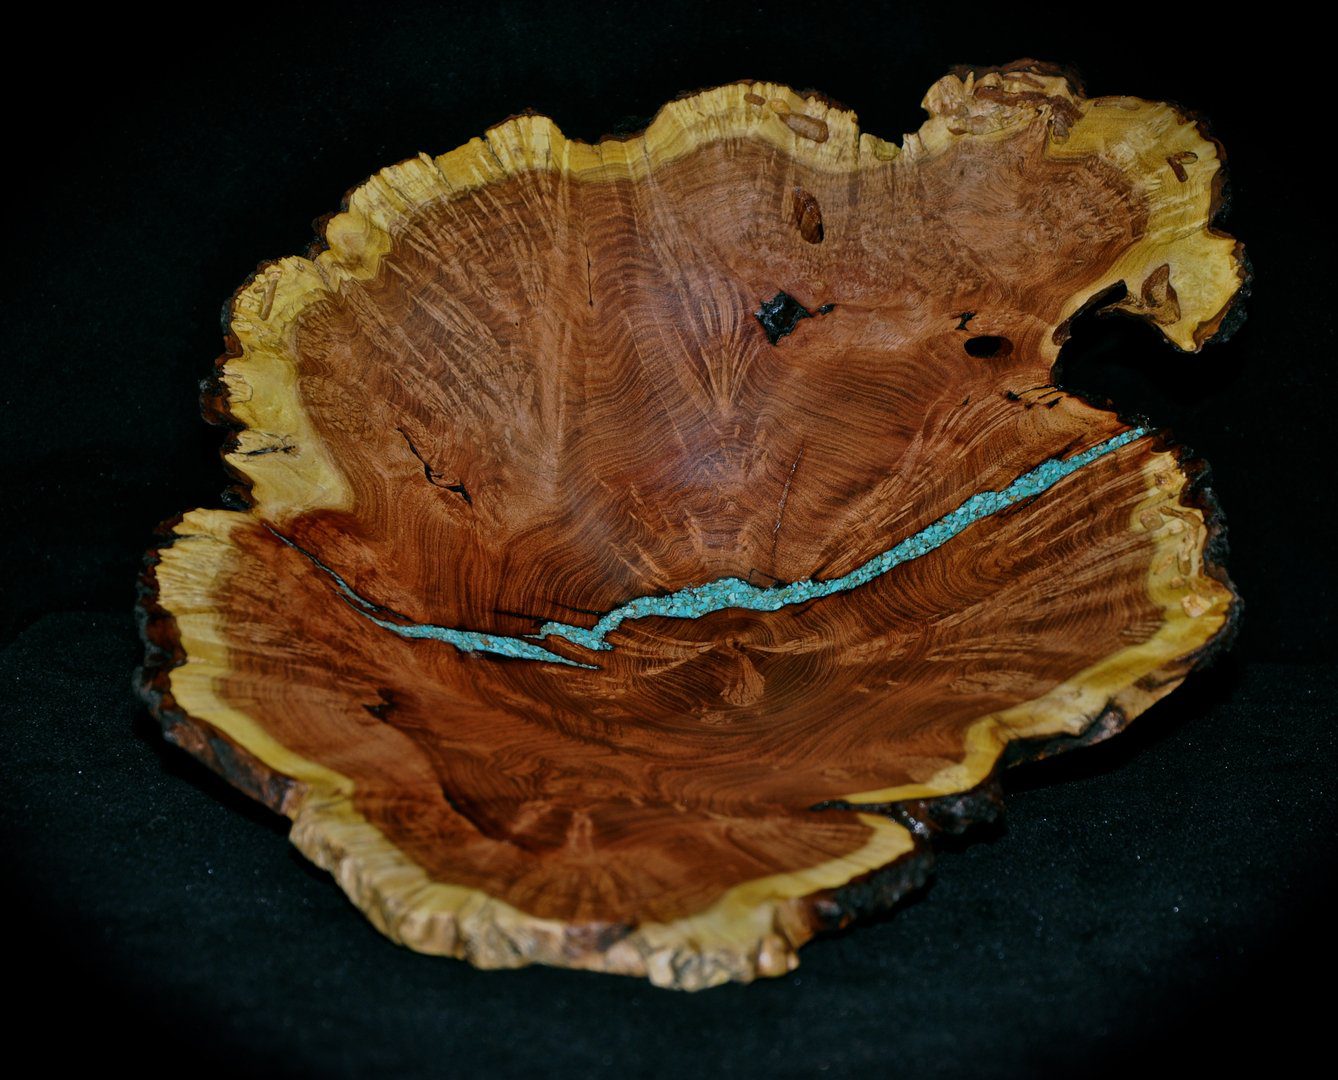 A bowl made of wood with a blue stripe on it.